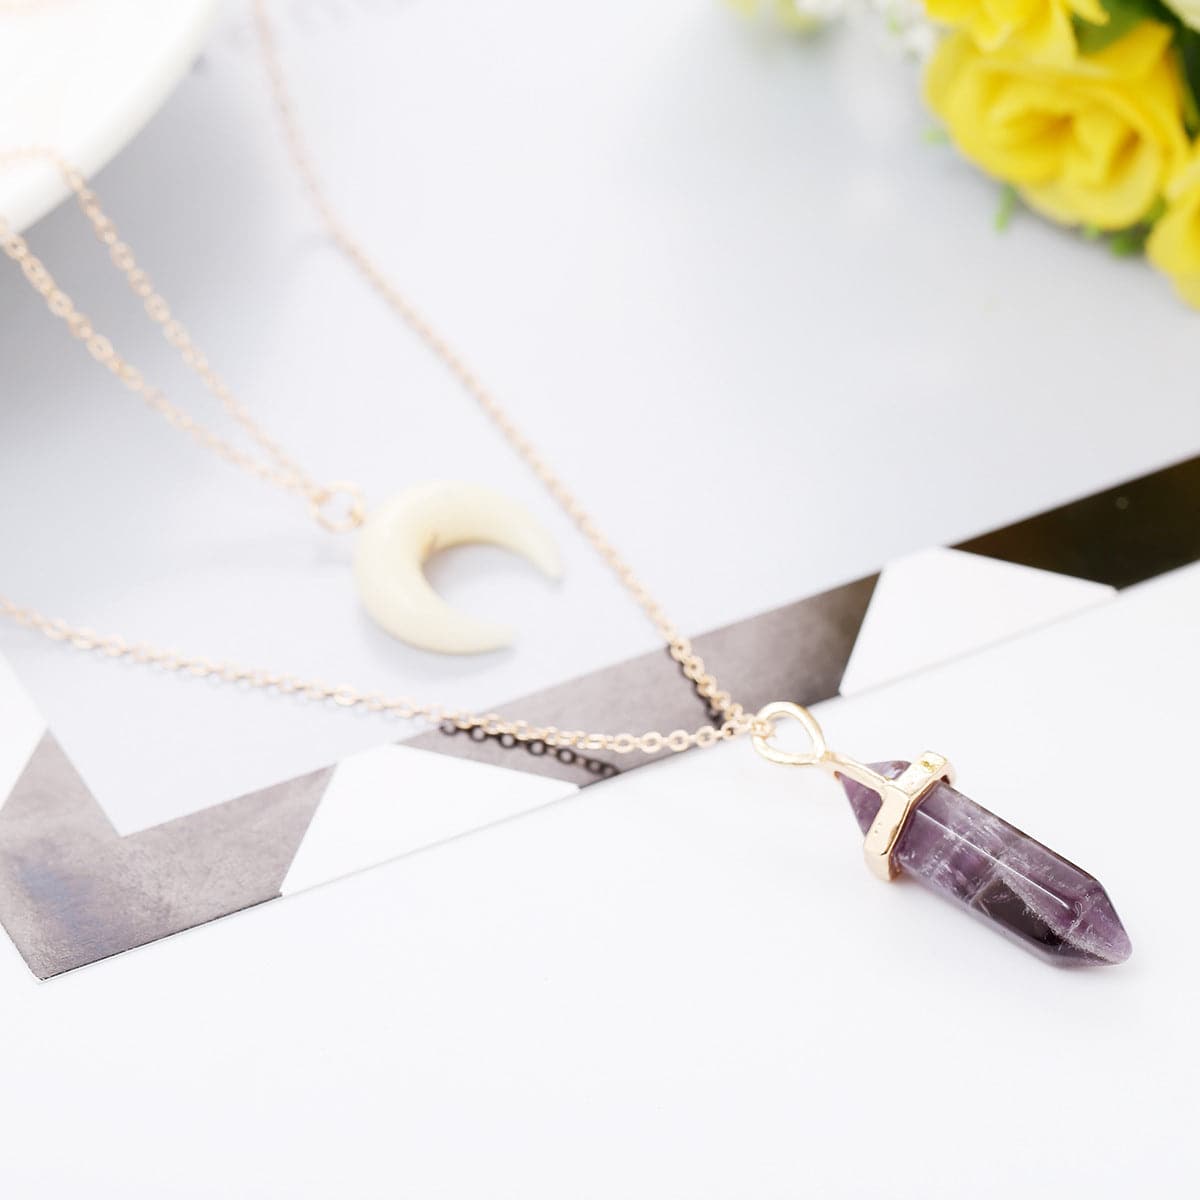 Purple Crystal & Acrylic 18K Gold-Plated Moon Layered Pendant Necklace